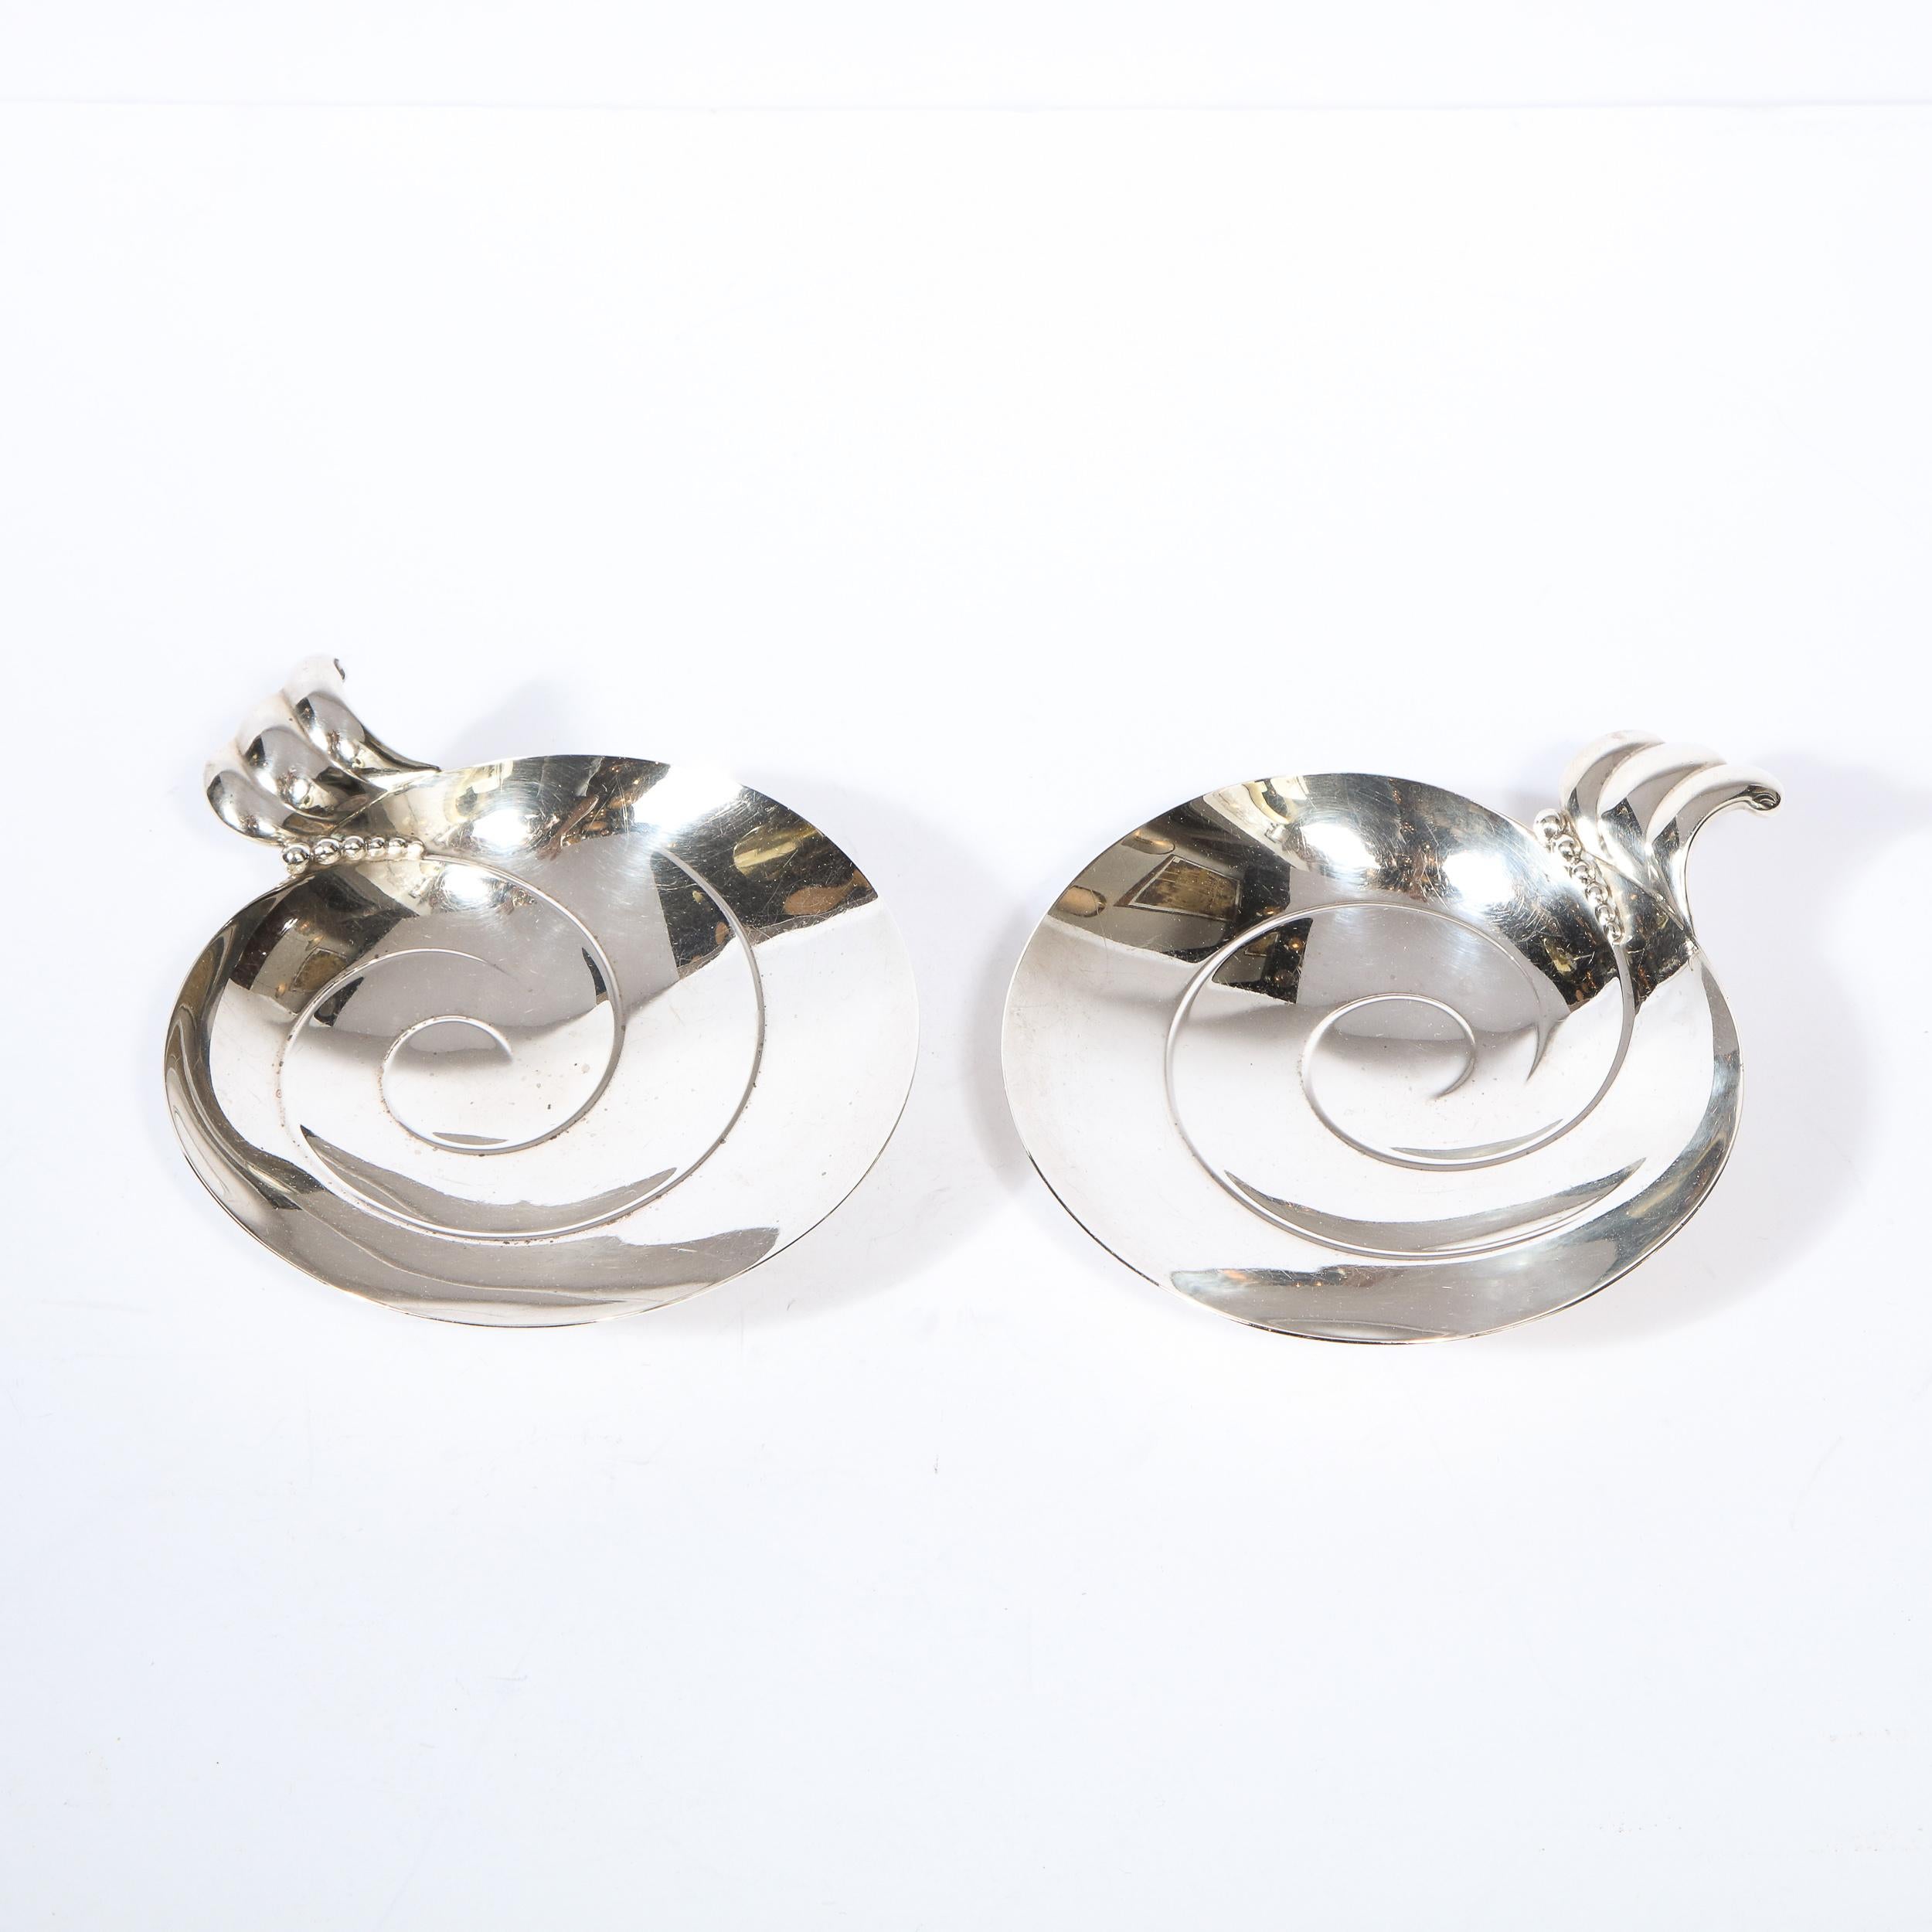 This stunning pair of footed sterling silver decorative dishes were realized by the fabled American maker Tiffany & Co. in the United States, circa 1950. They feature circular bodies with a slightly concave centers with an incised swirling pattern;